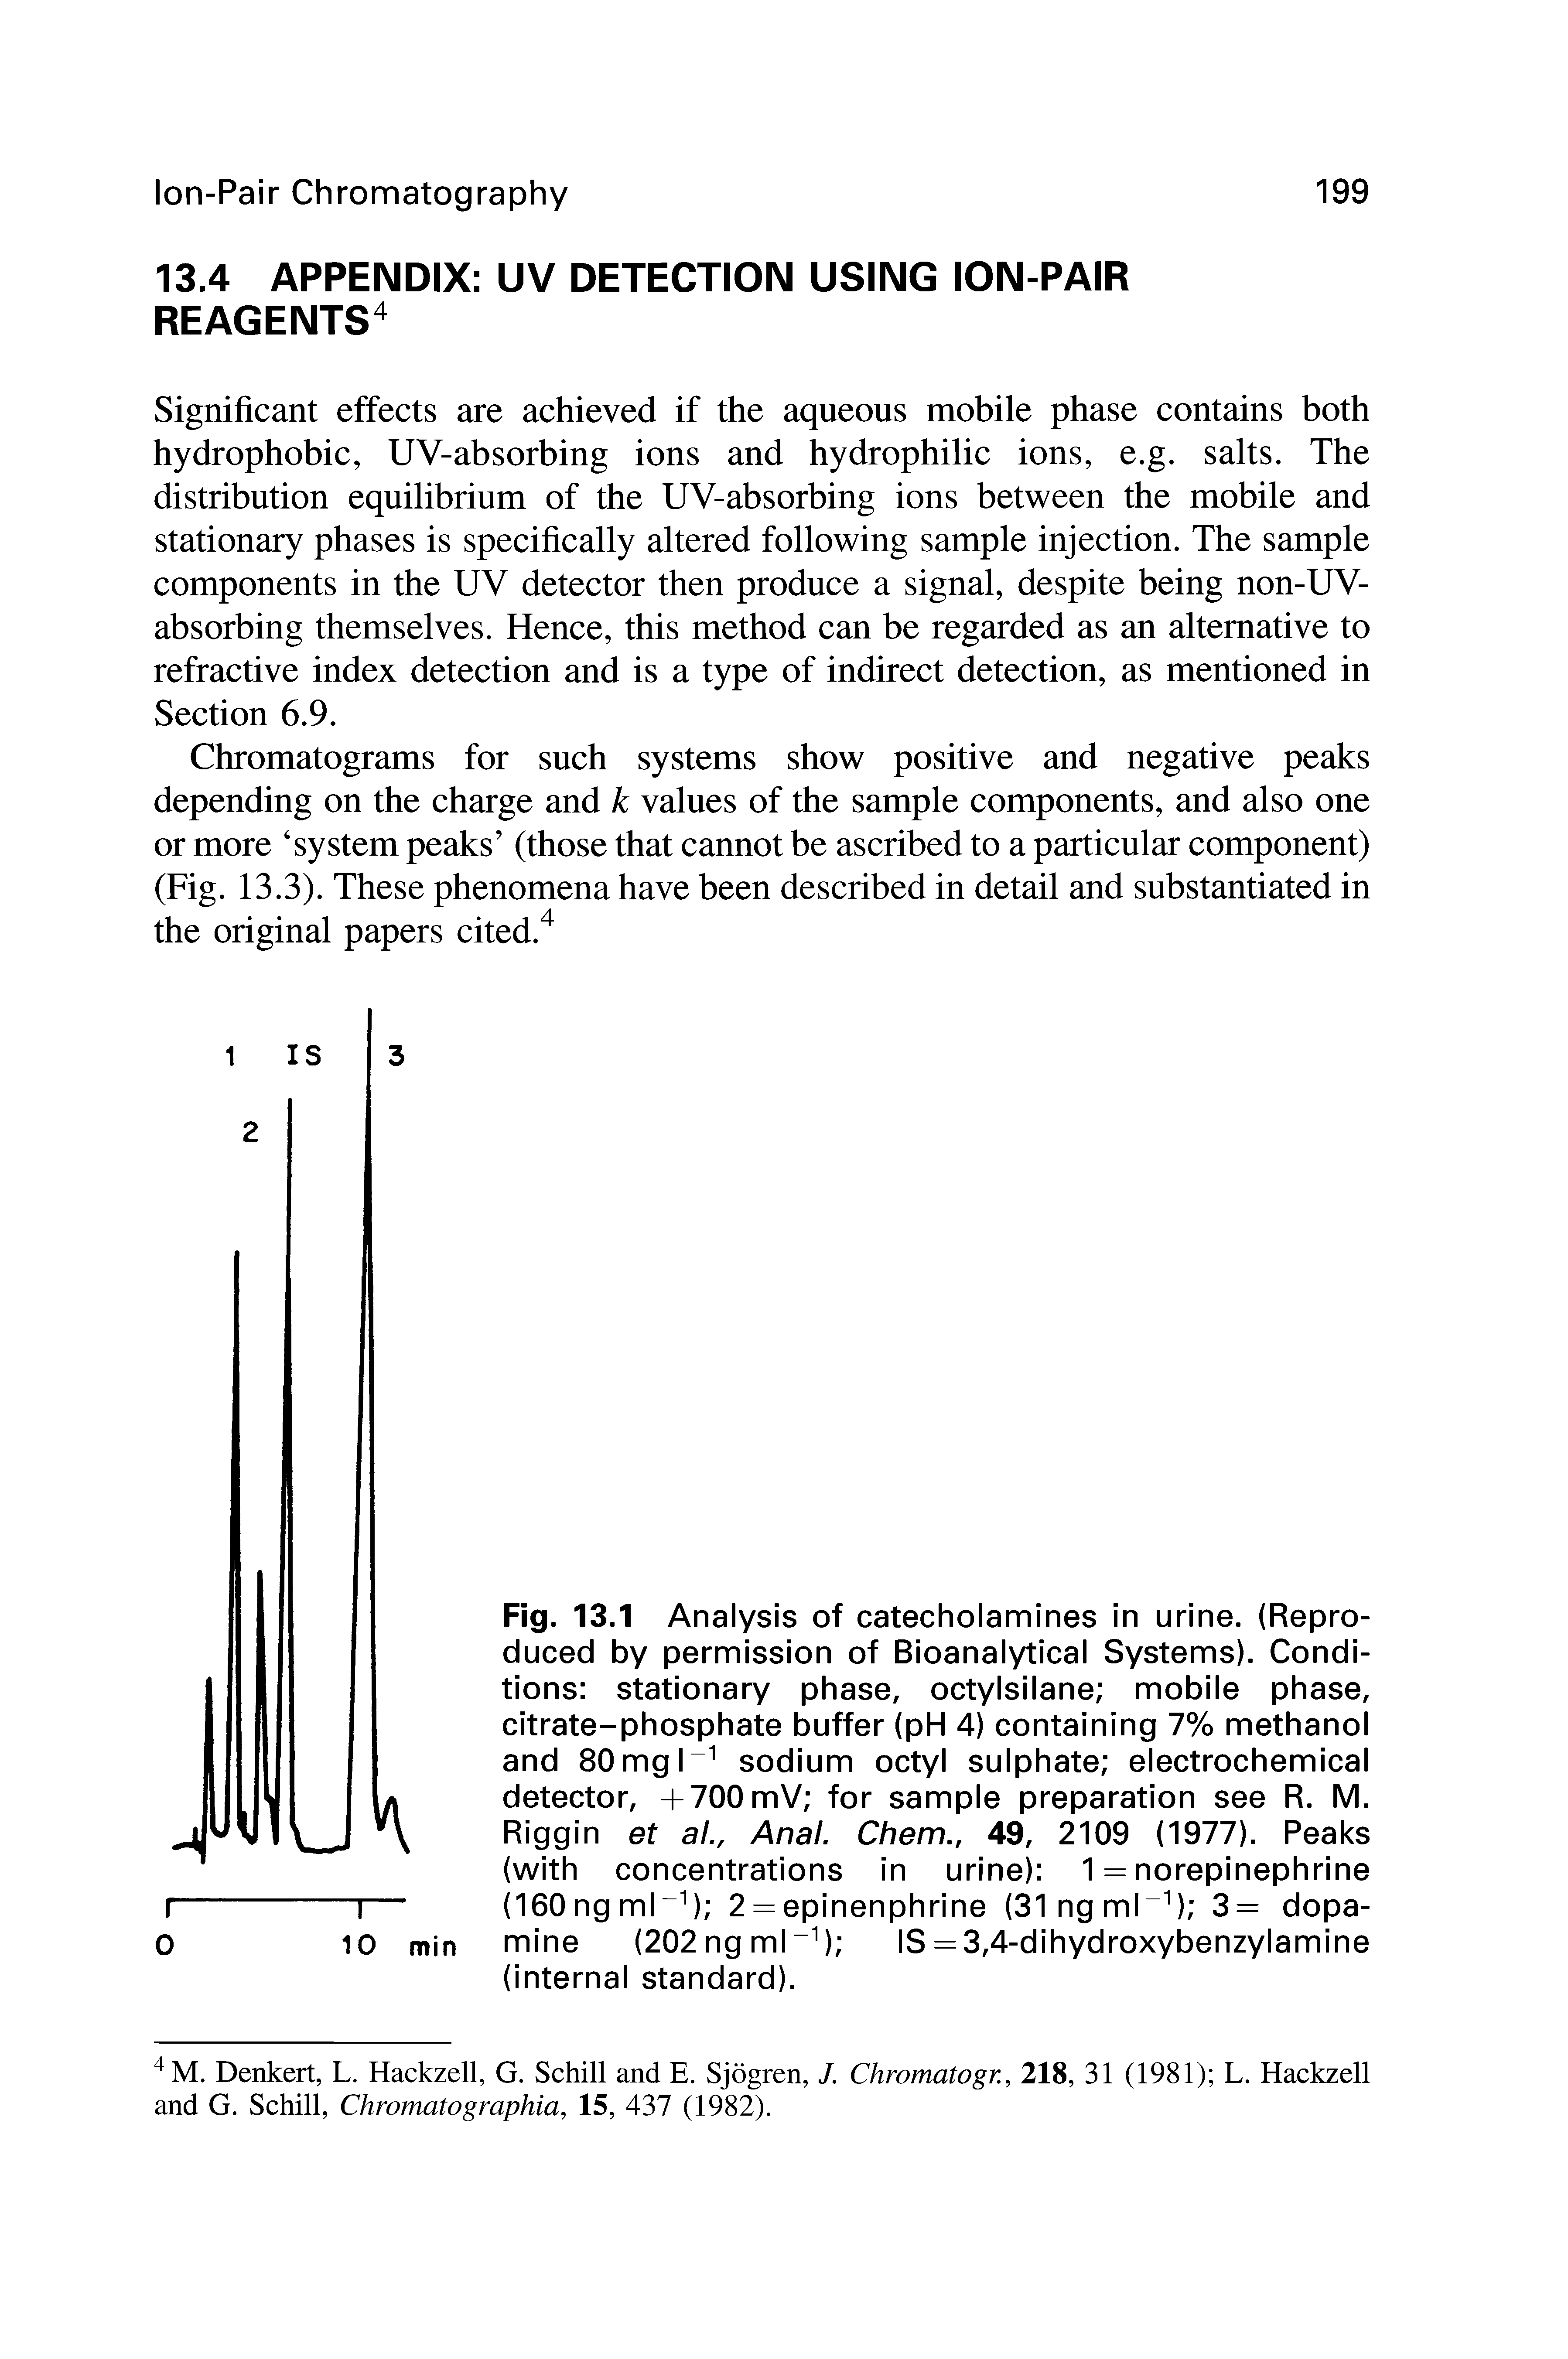 Fig. 13.1 Analysis of catecholamines in urine. (Reproduced by permission of Bioanalytical Systems). Conditions stationary phase, octylsilane mobile phase, citrate-phosphate buffer (pH 4) containing 7% methanol and 80 mg I sodium octyl sulphate electrochemical detector, -h700 mV for sample preparation see R. M. Riggin et a/.. Anal. Chem., 49, 2109 (1977). Peaks (with concentrations in urine) 1 = norepinephrine (lOOngmU ) 2 = epinenphrine OIngmU ) 3= dopamine (202 ng mU" ) IS = 3,4-dihydroxybenzylamine (internal standard).